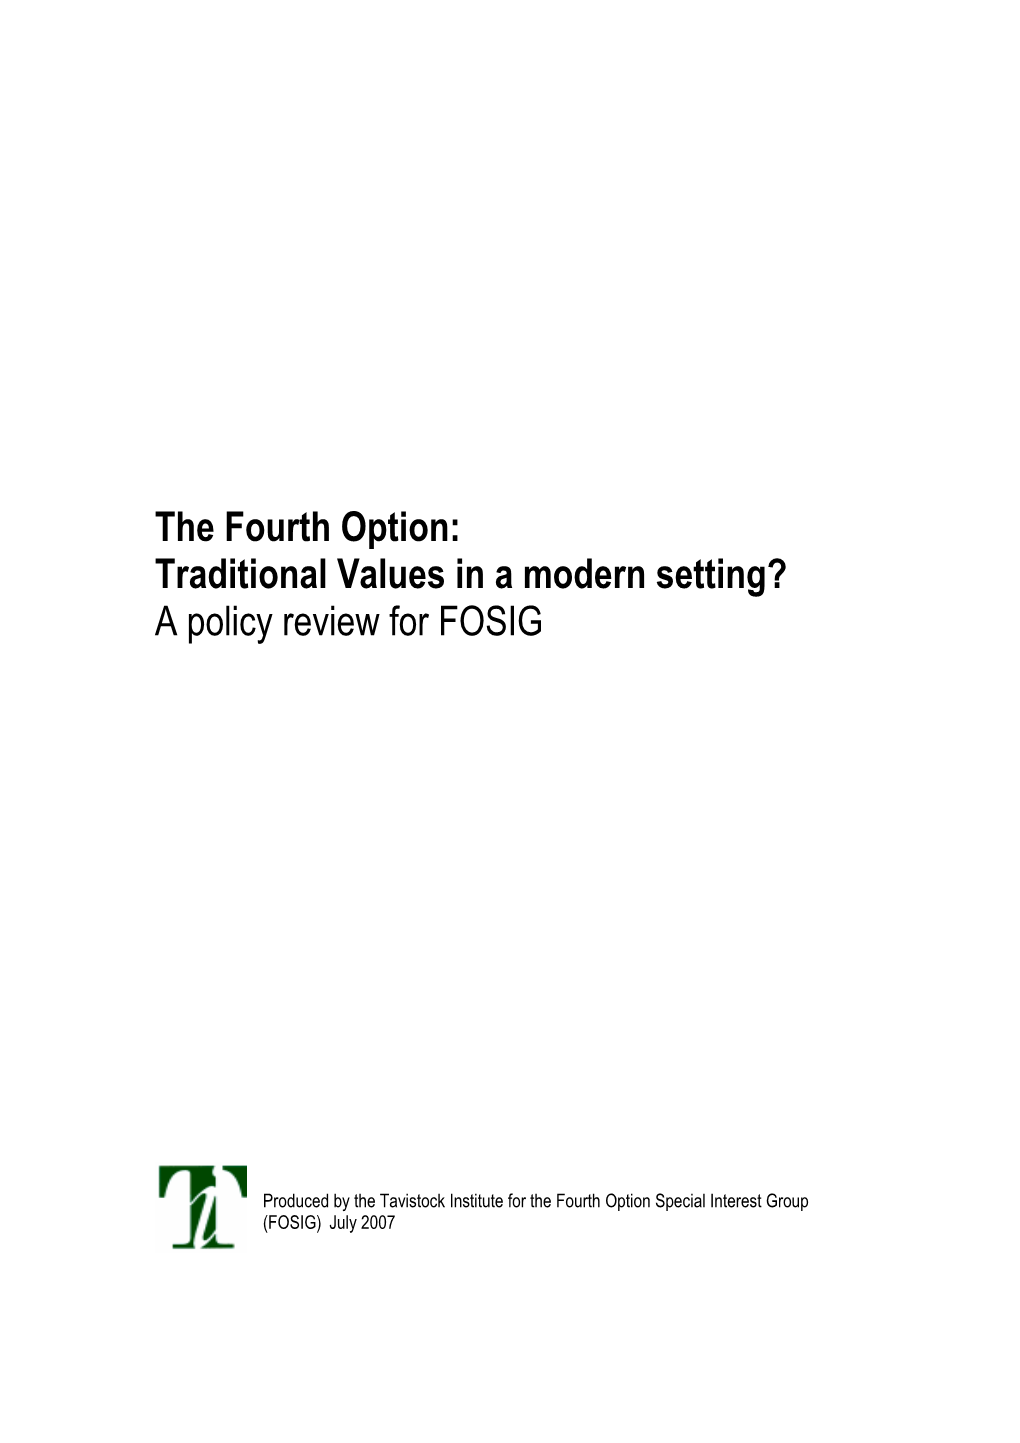 The Fourth Option: Traditional Values in a Modern Setting? a Policy Review for FOSIG